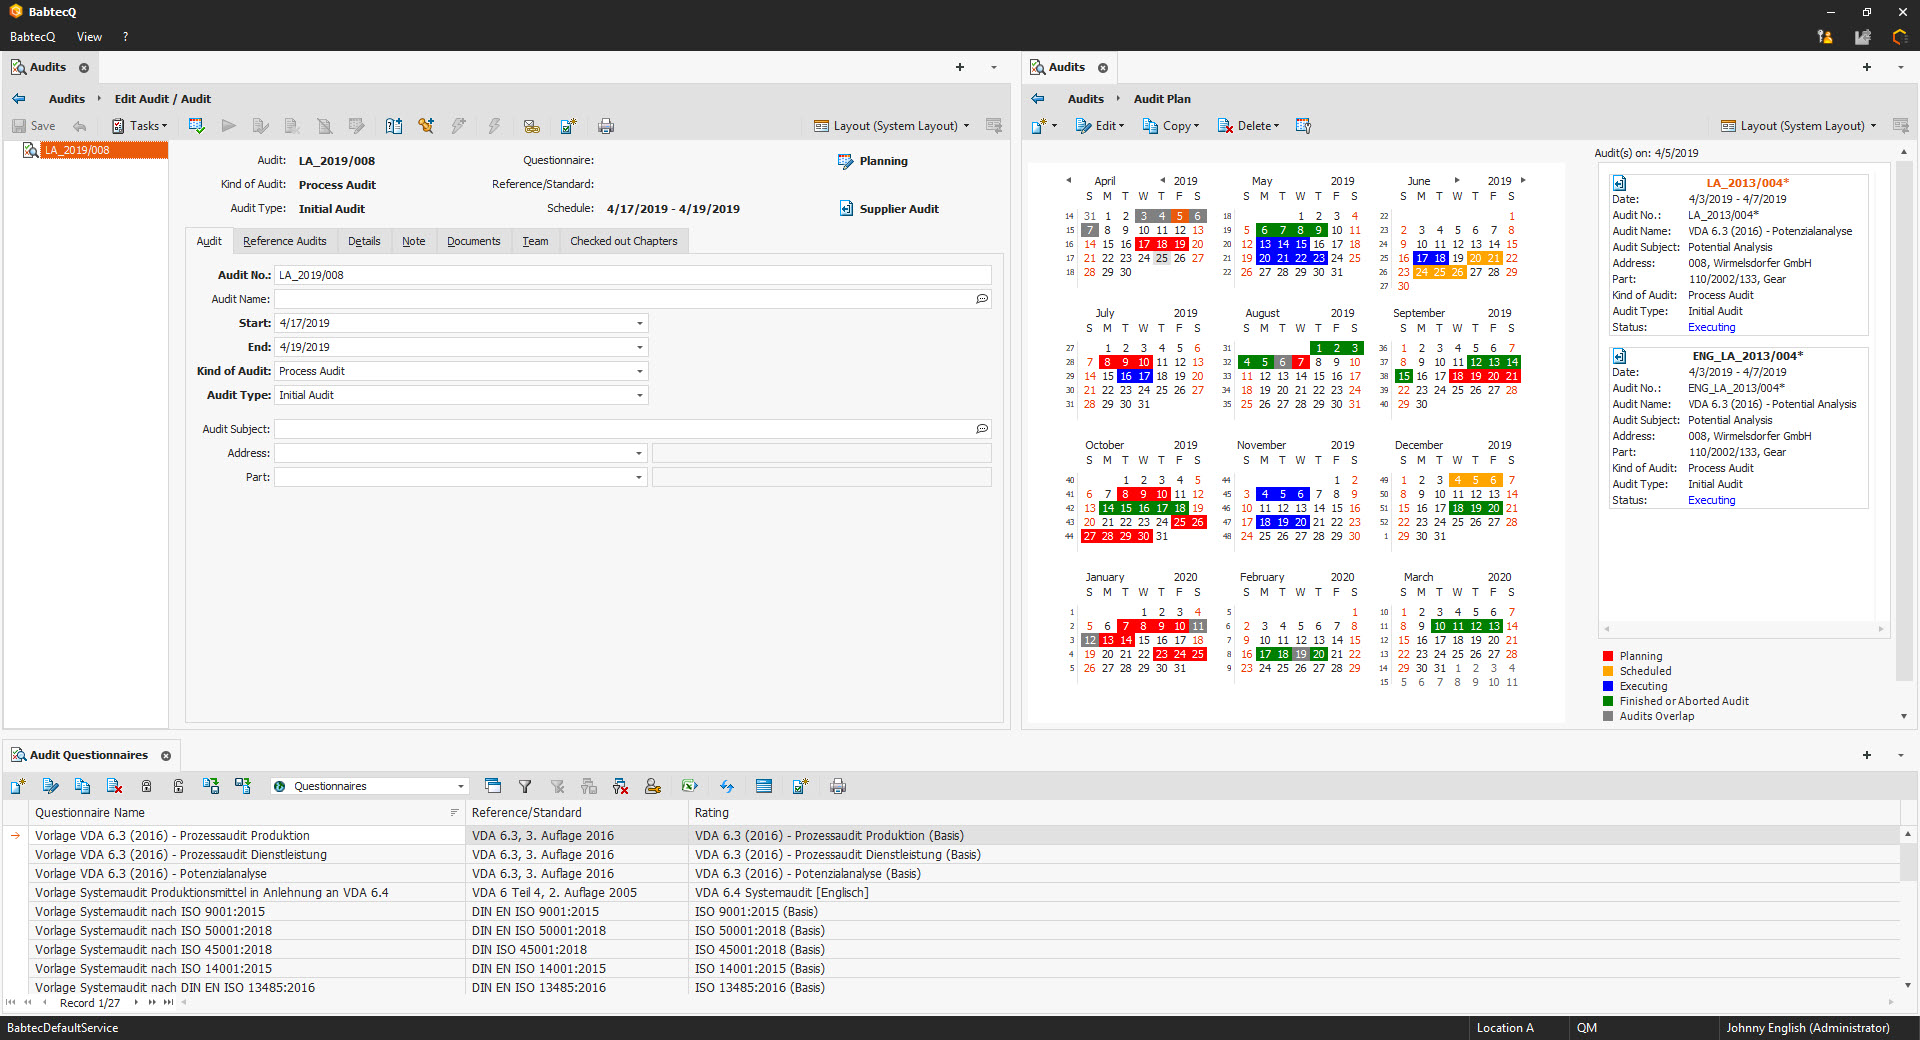 Audit Management in the QM software from Babtec